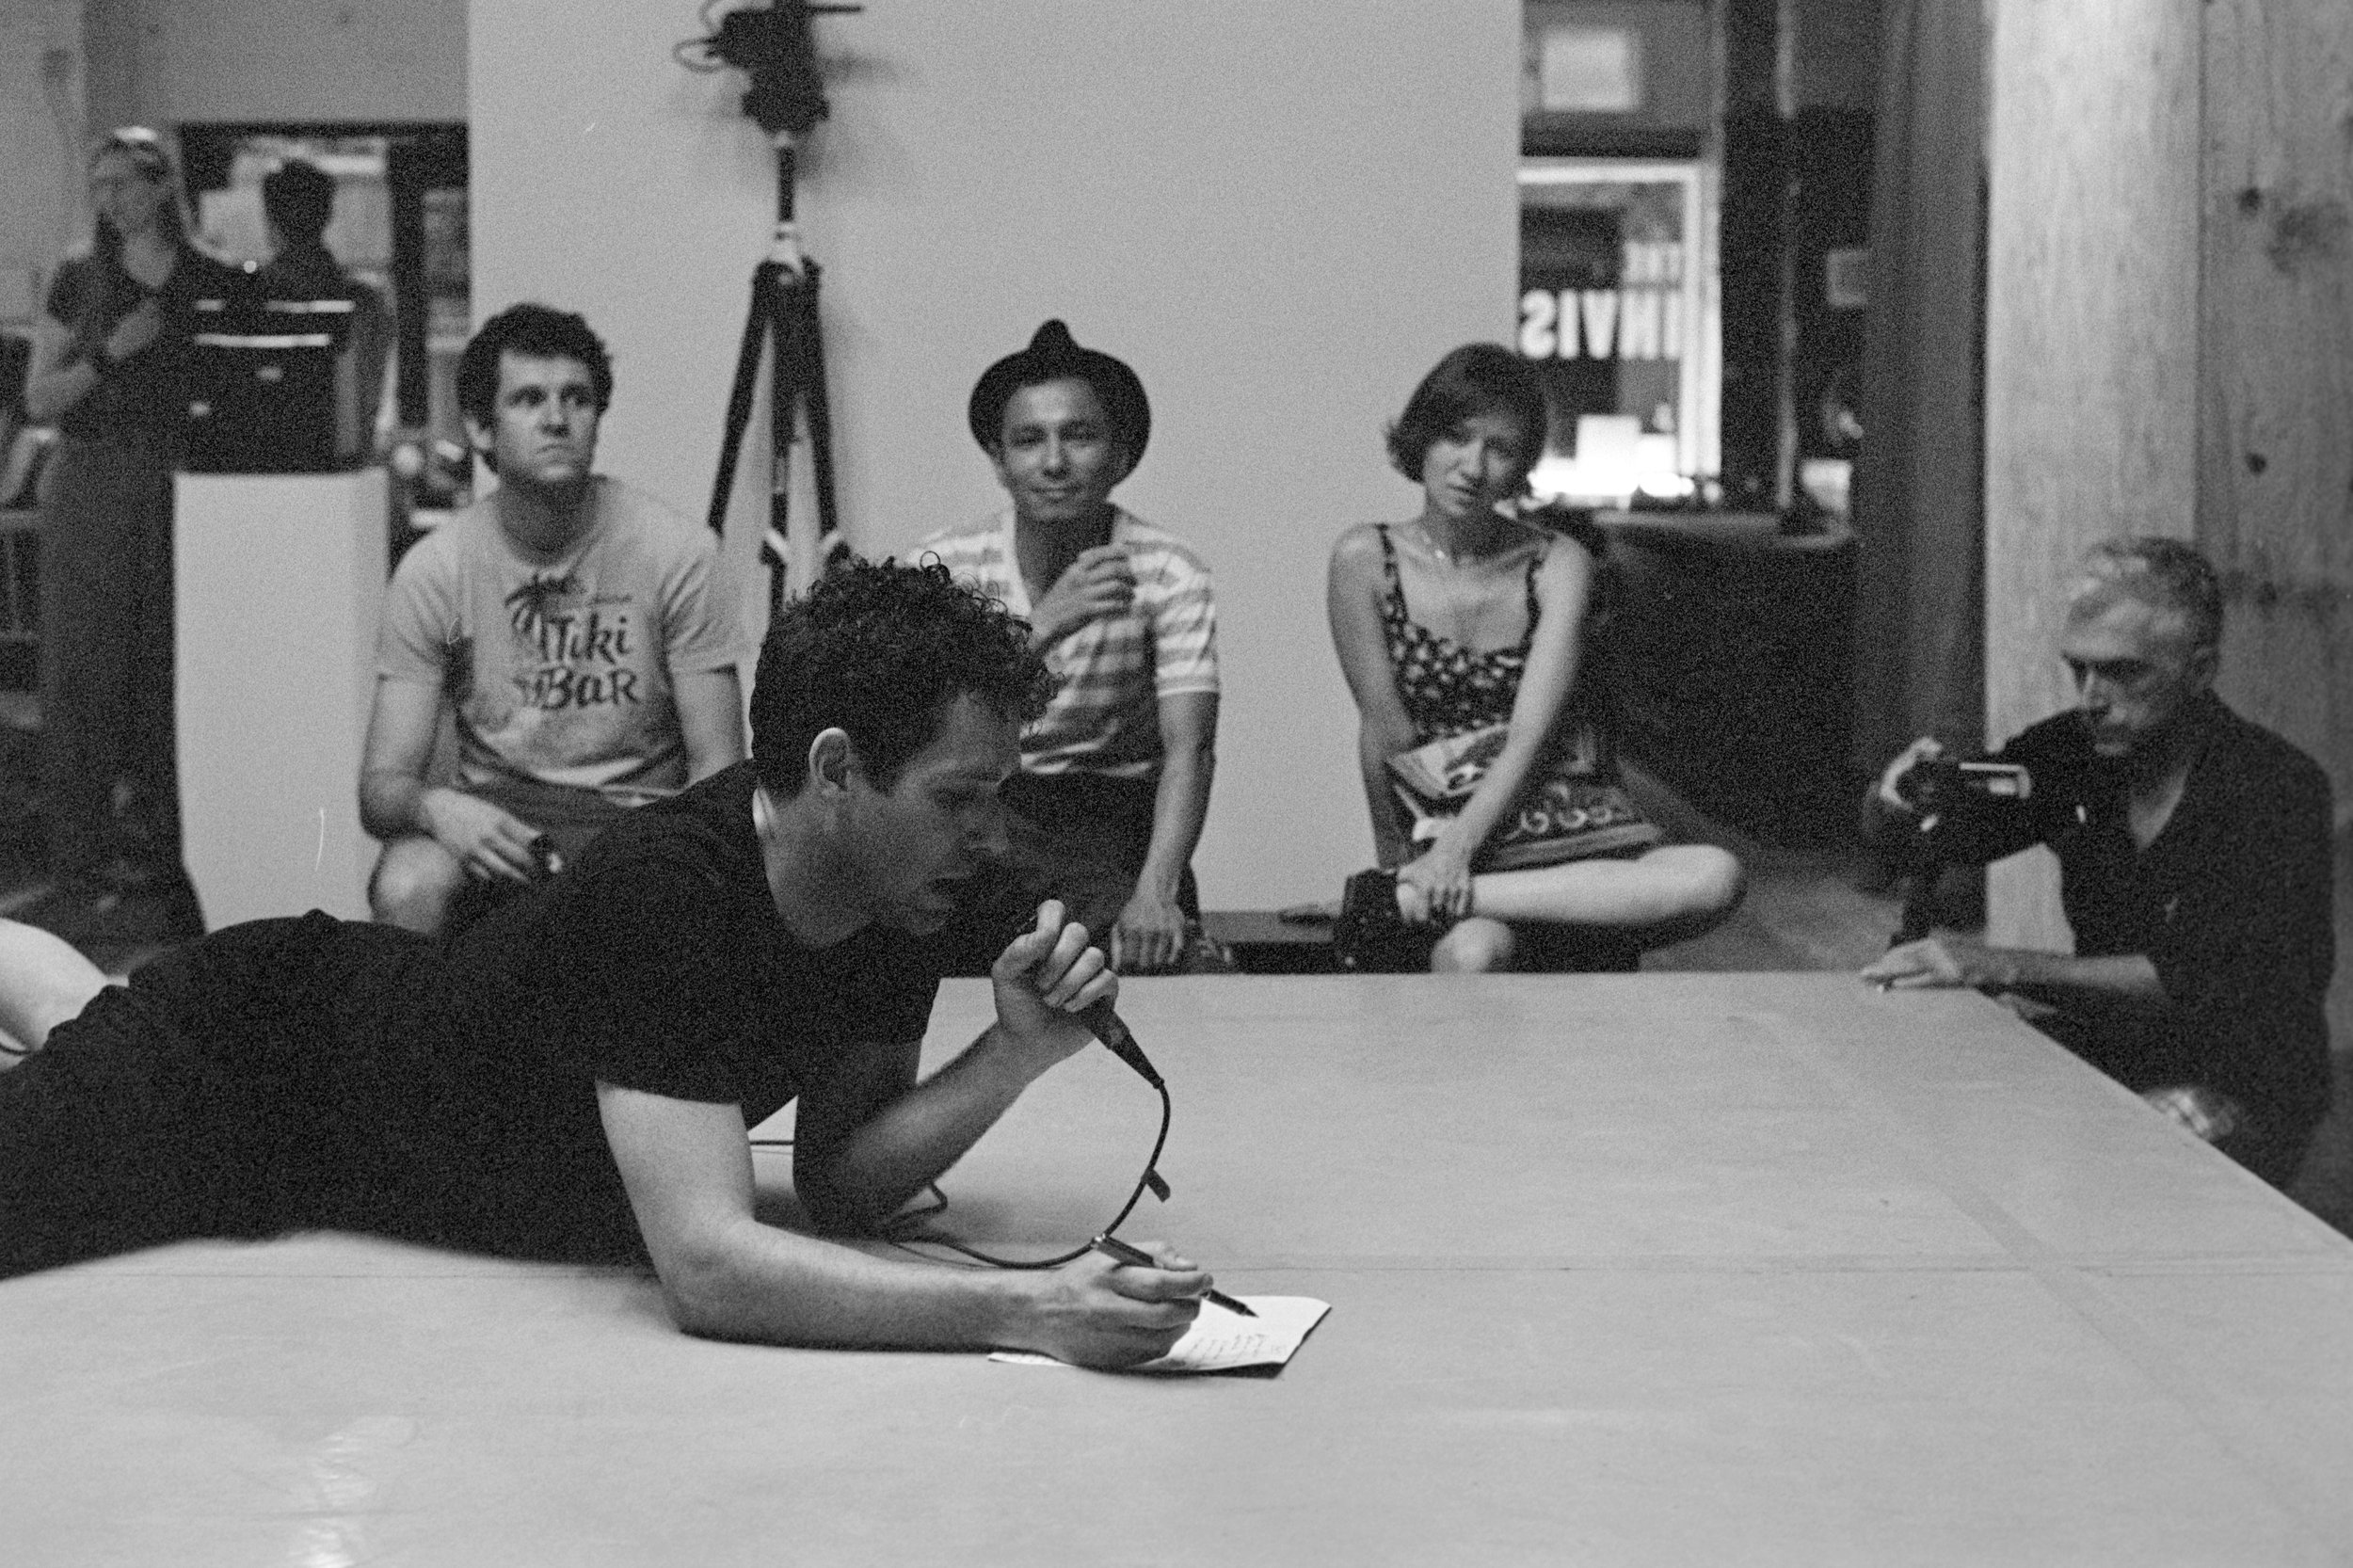 A performer lays on a platform speaking into a mic viewed by three people on a bench and a videographer. Photo by David Bivins.